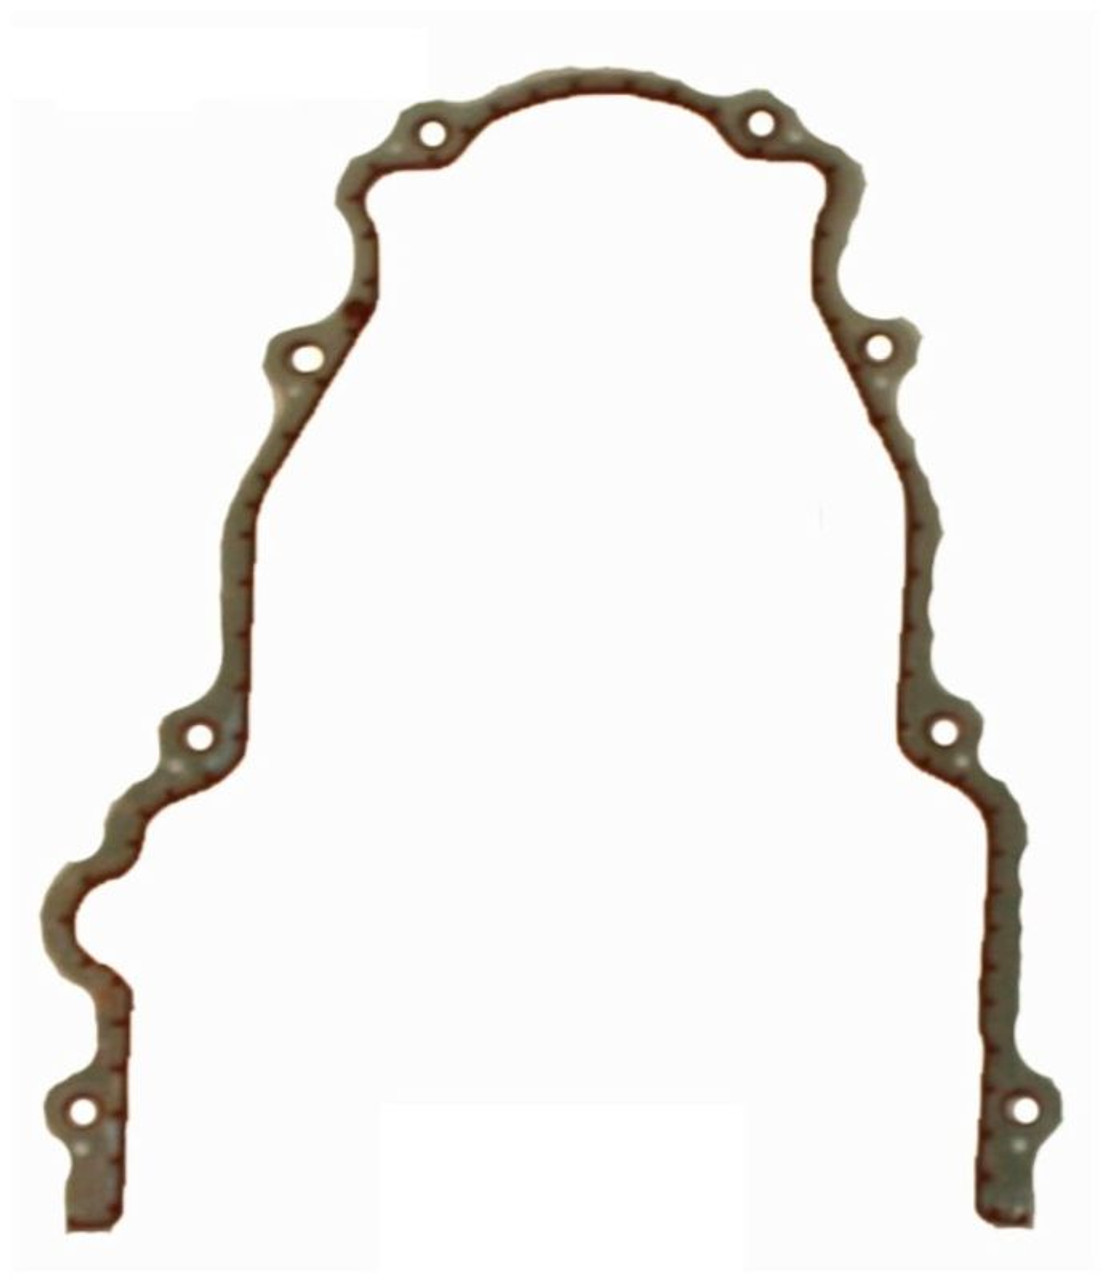 2010 Cadillac Escalade 6.0L Engine Timing Cover Gasket TCG293-A -633